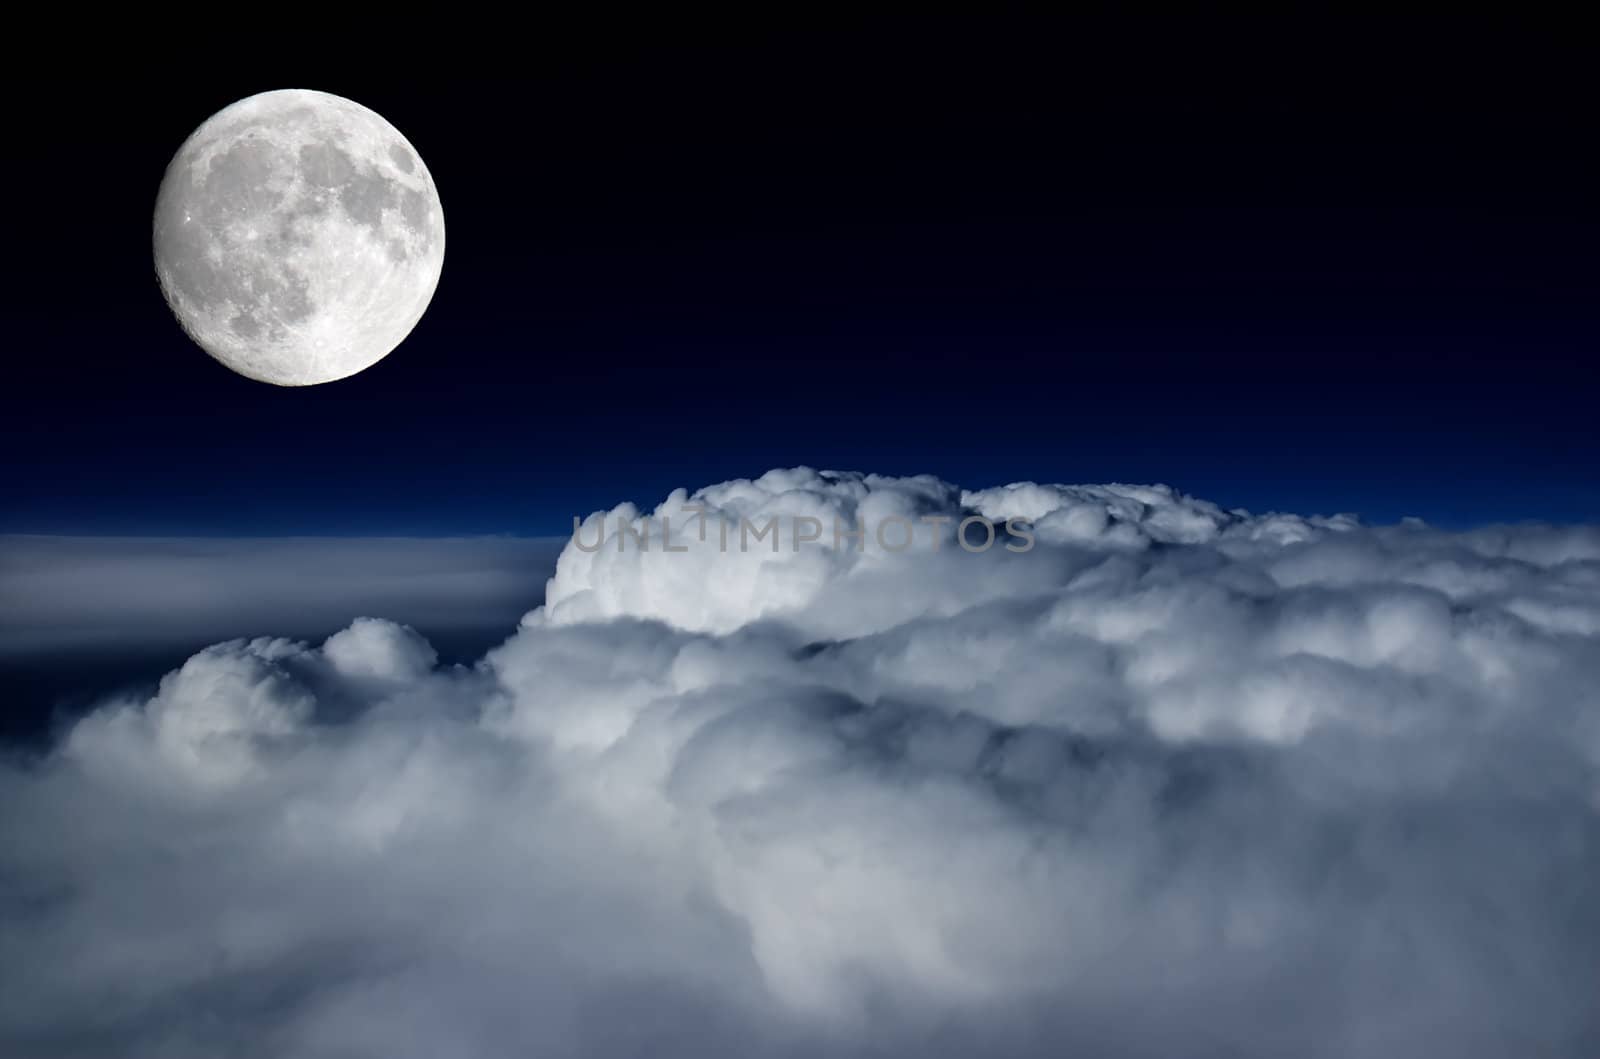 Full moon lighting up the clouds below